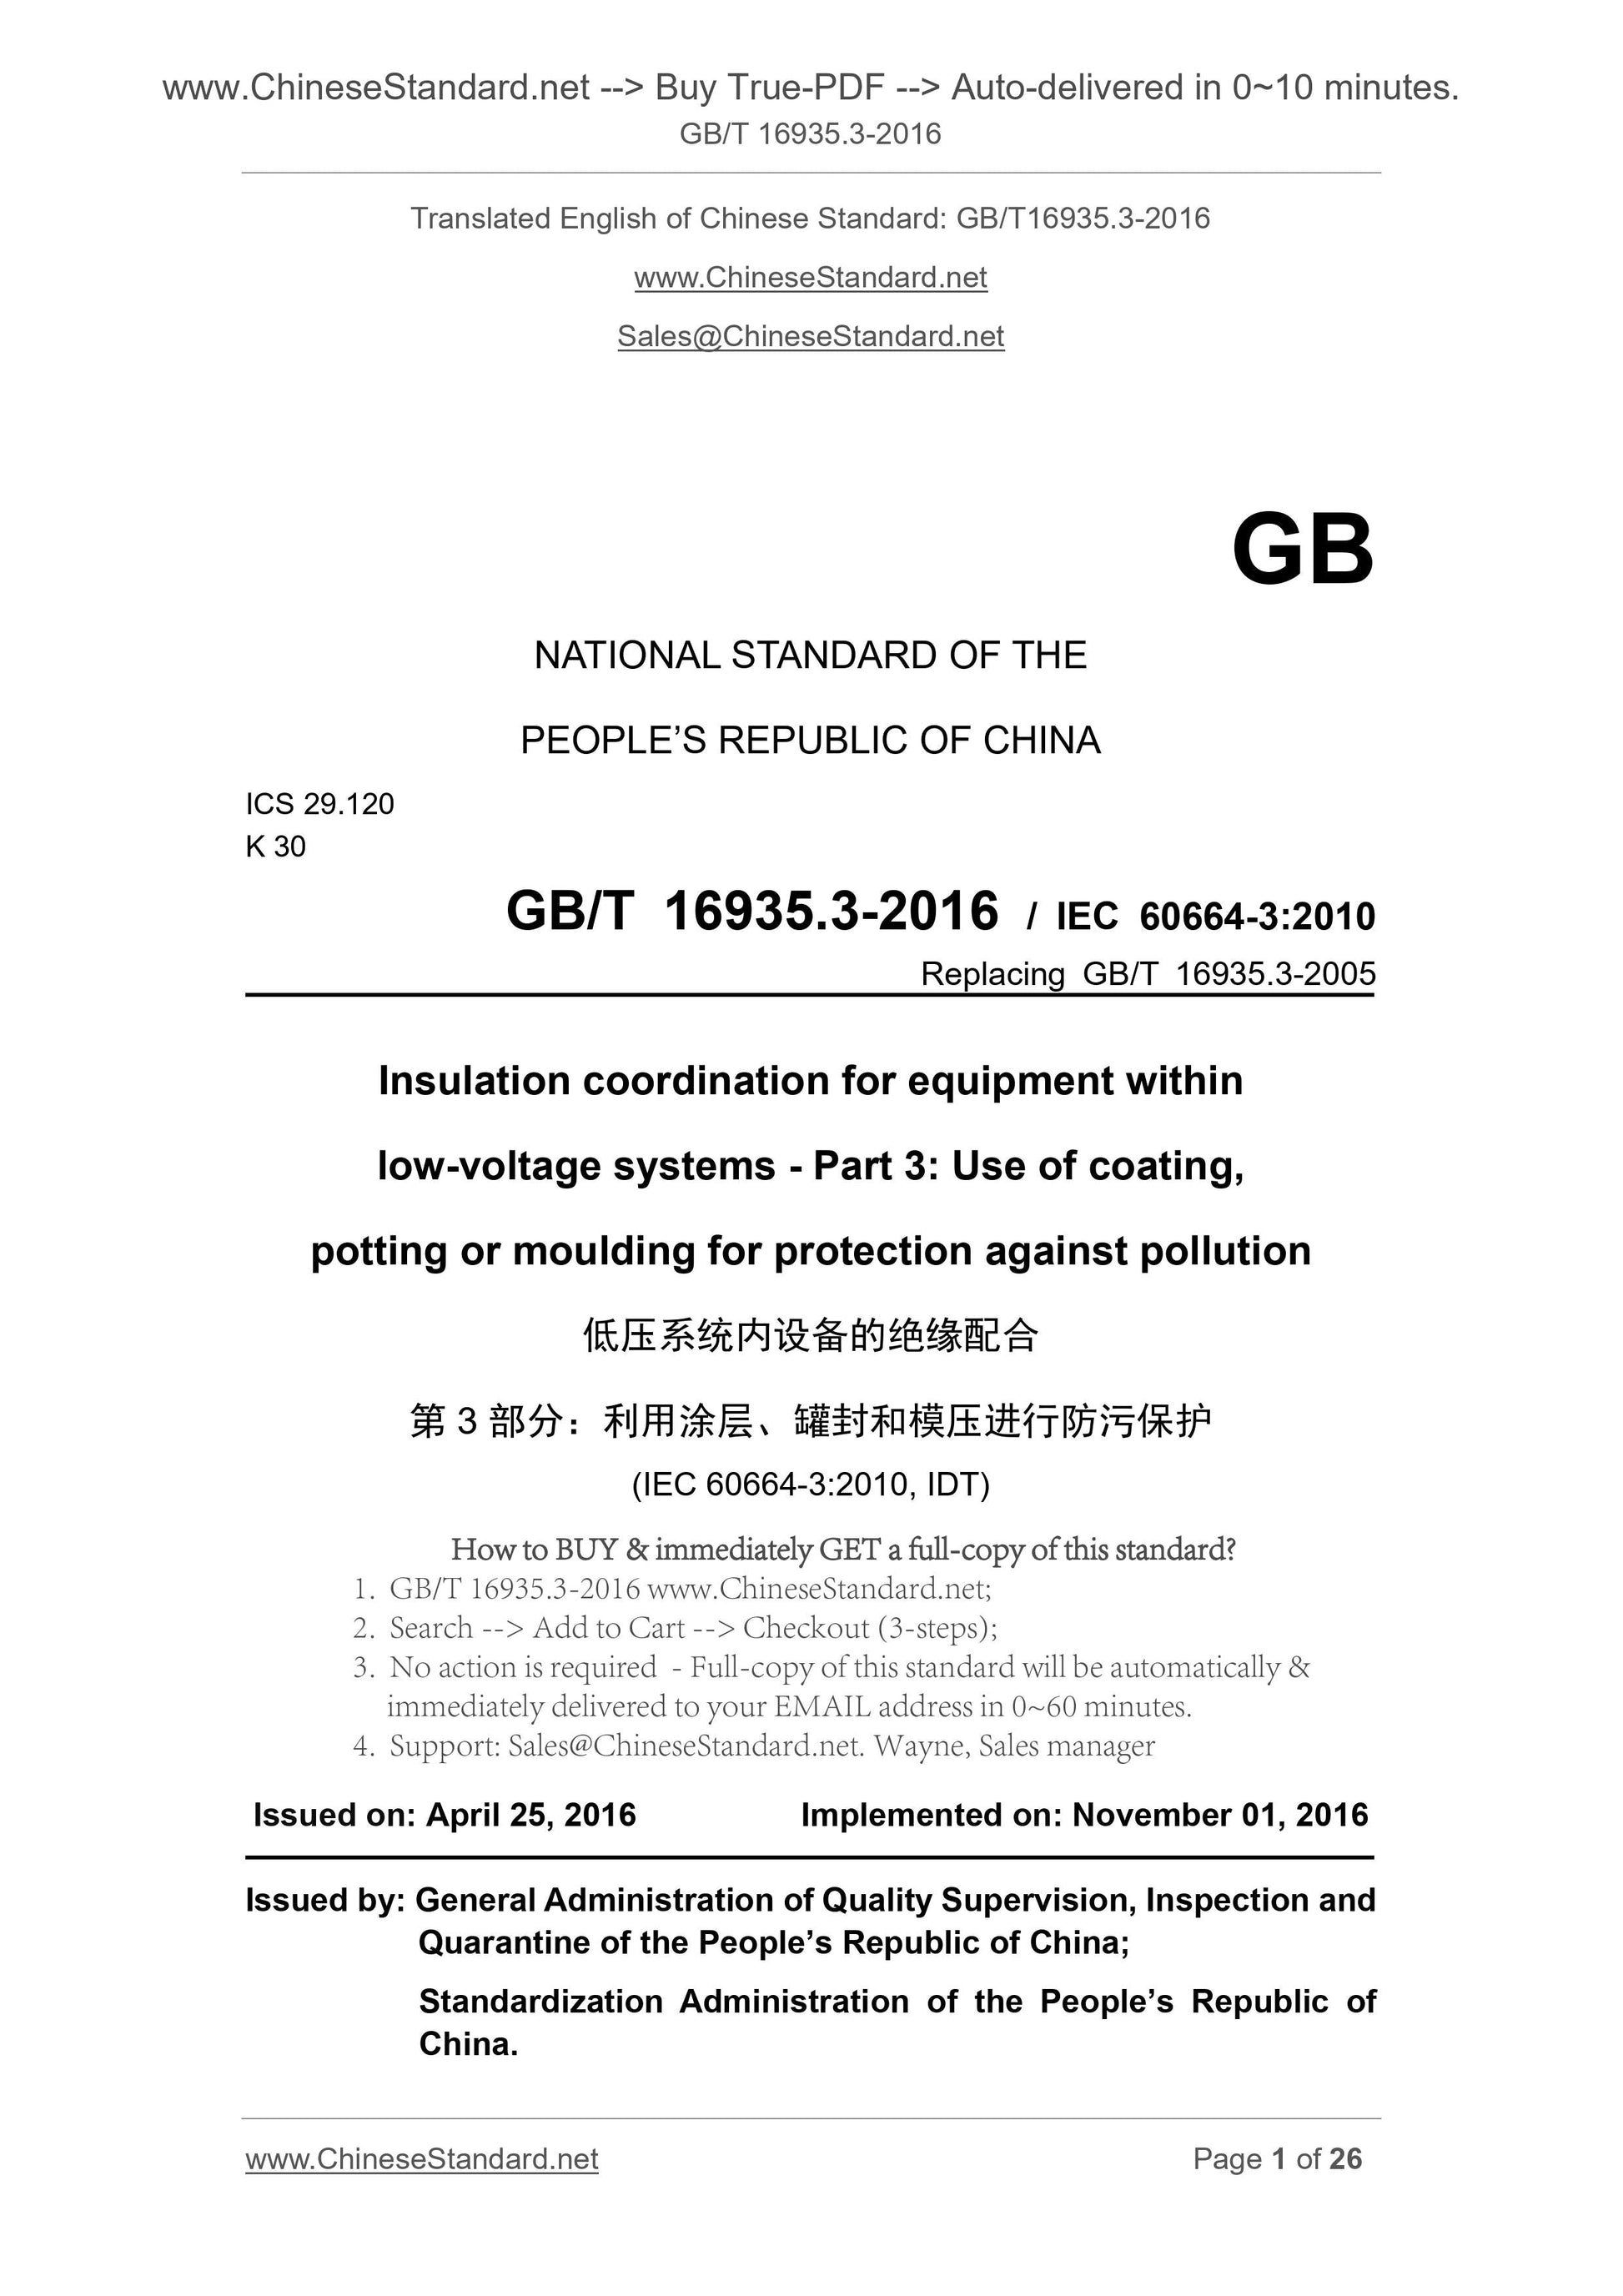 GB/T 16935.3-2016 Page 1